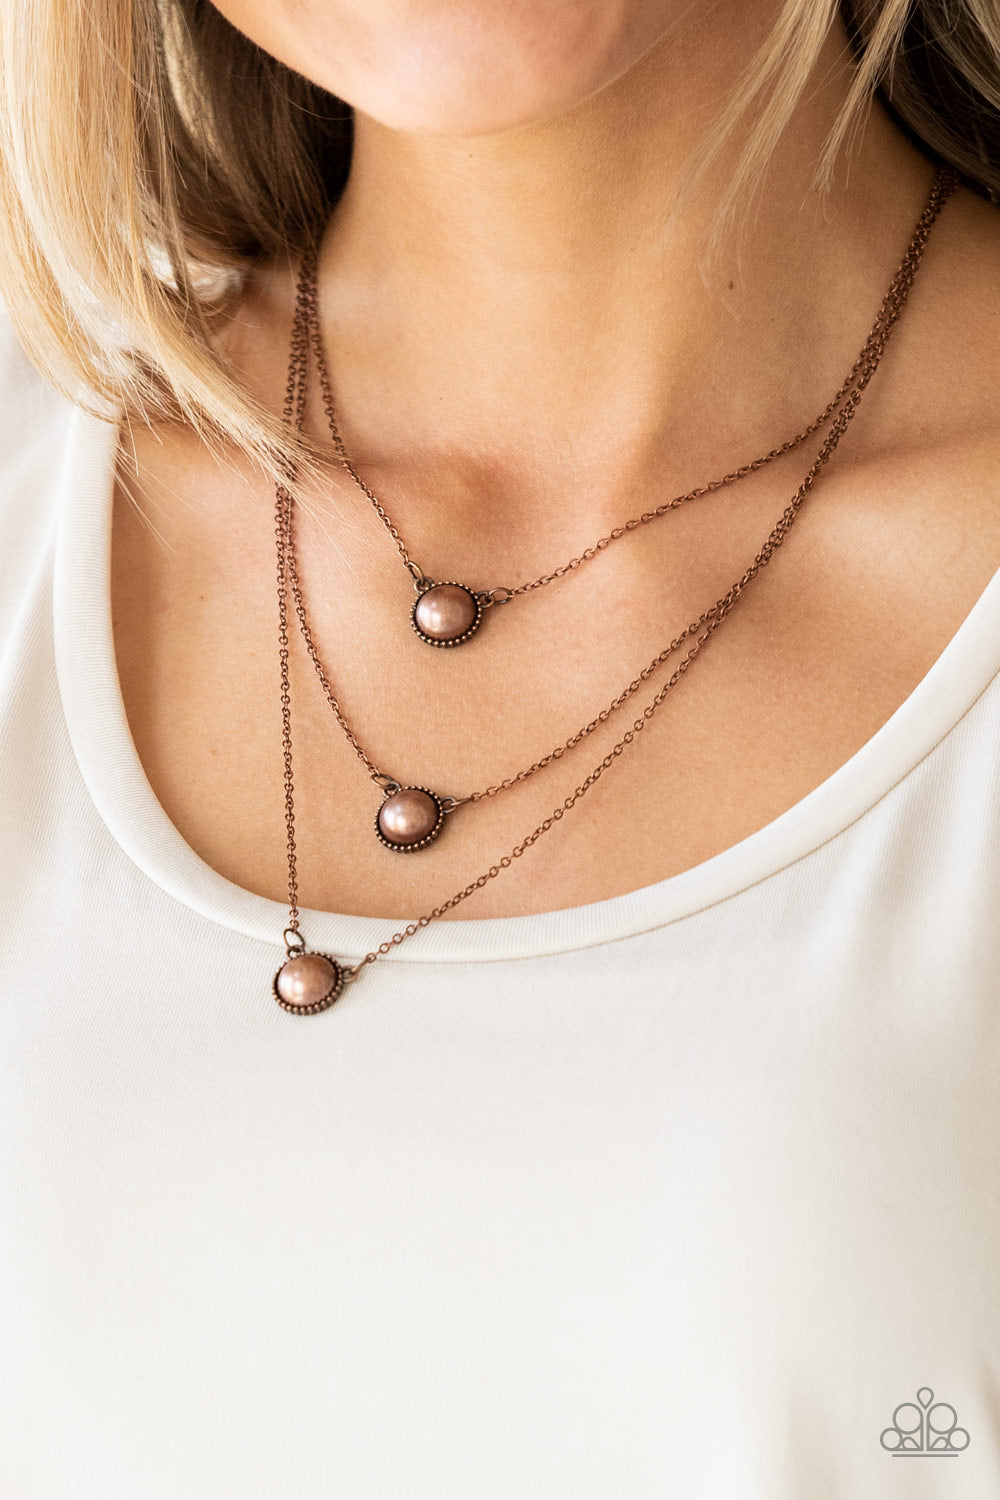 A Love For Luster - Copper Necklace - Paparazzi Accessories